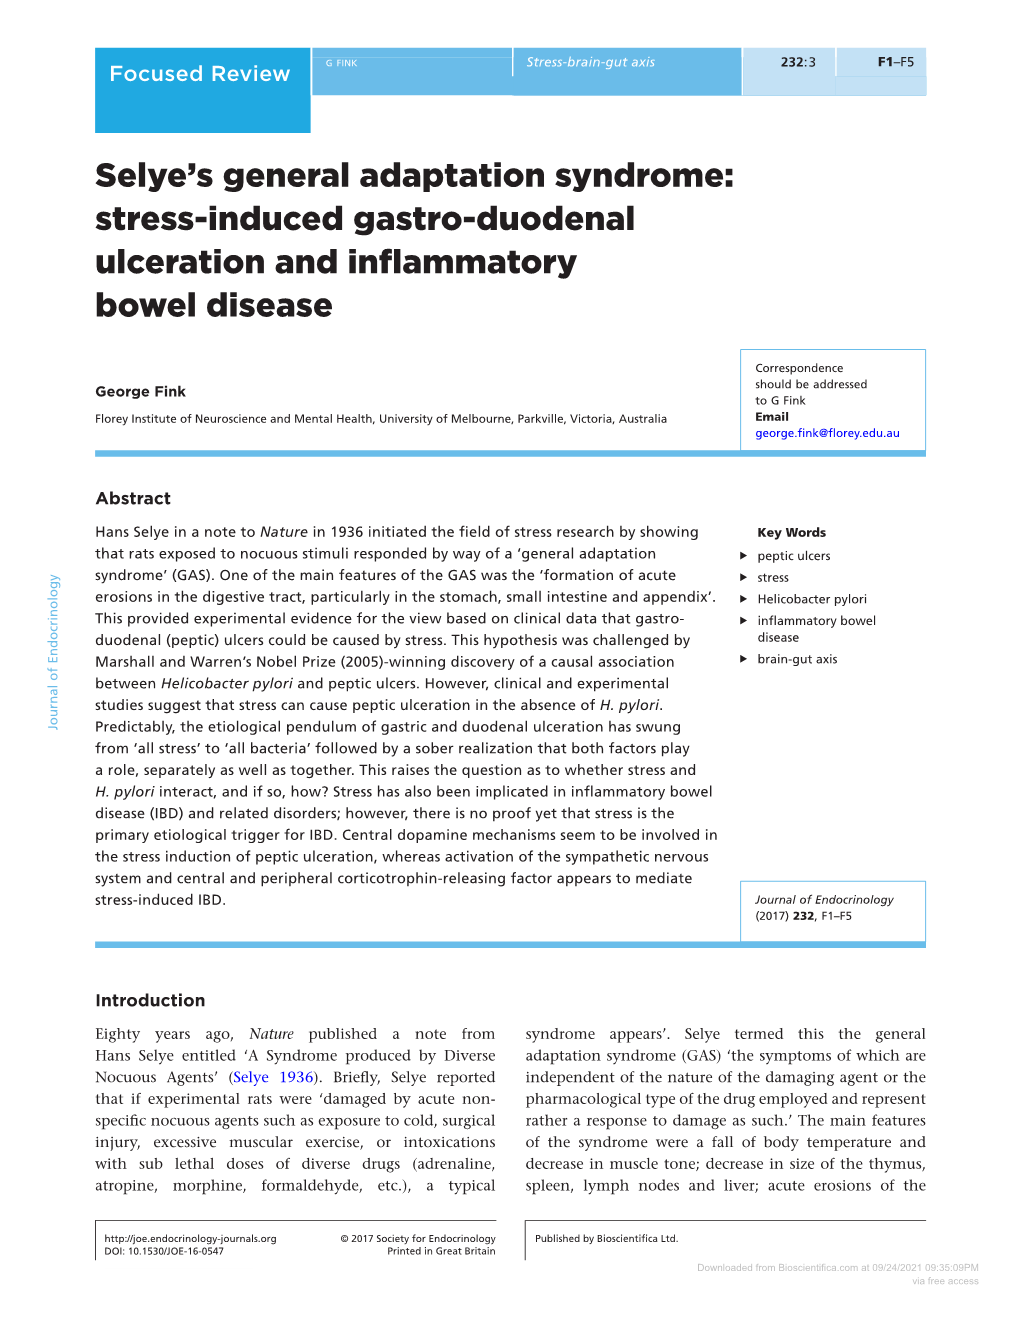 Stress-Induced Gastro-Duodenal Ulceration and Inflammatory Bowel Disease